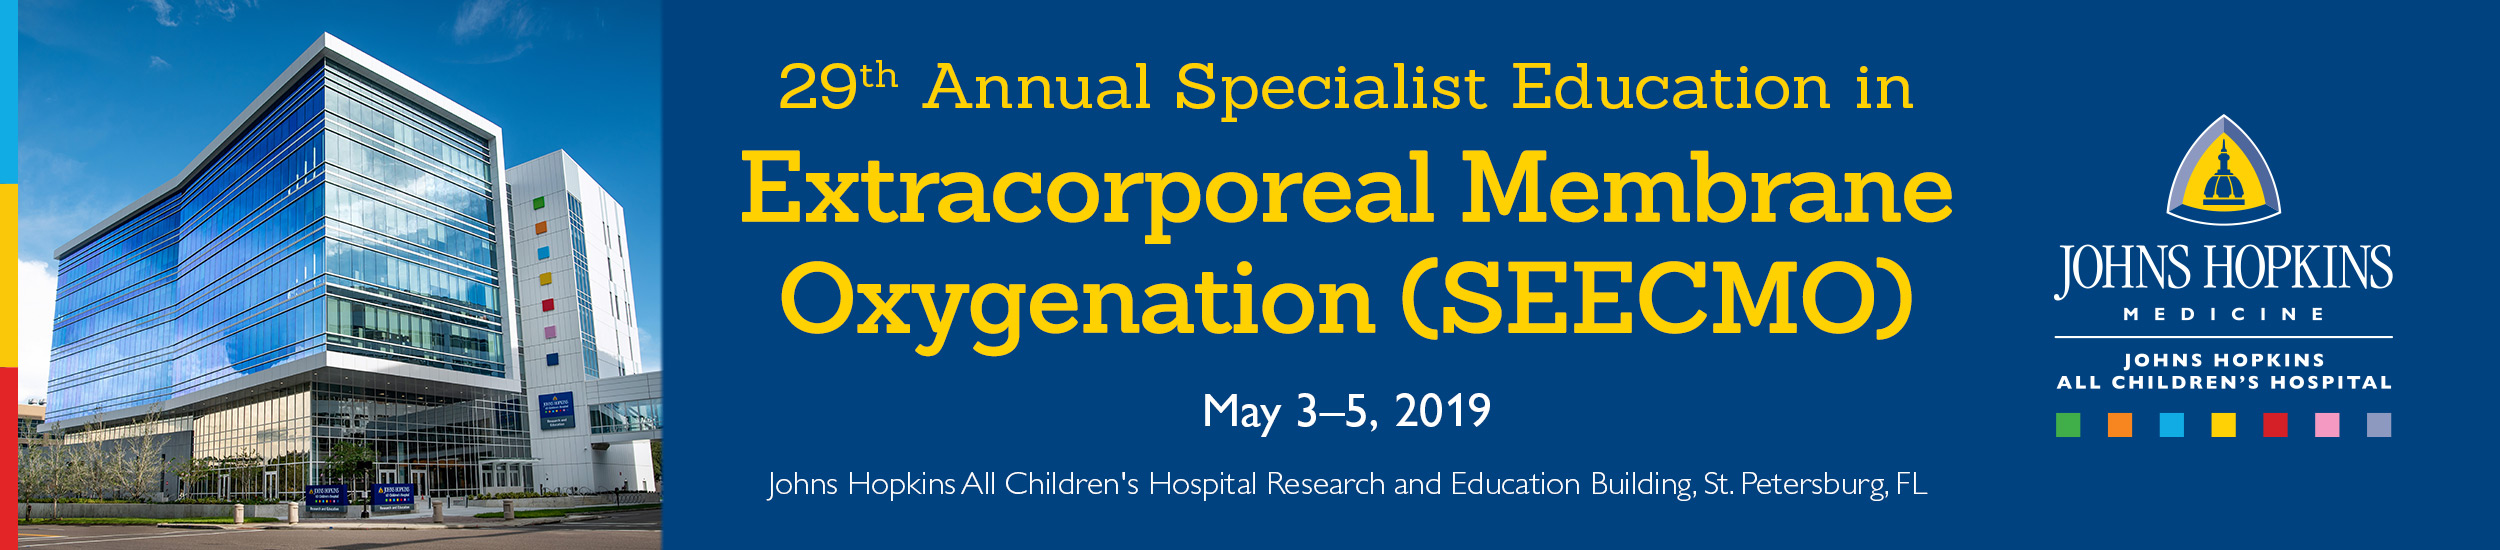 JHACH 29th Annual Specialist Education in Extracorporeal Membrane Oxygenation (SEECMO) Banner